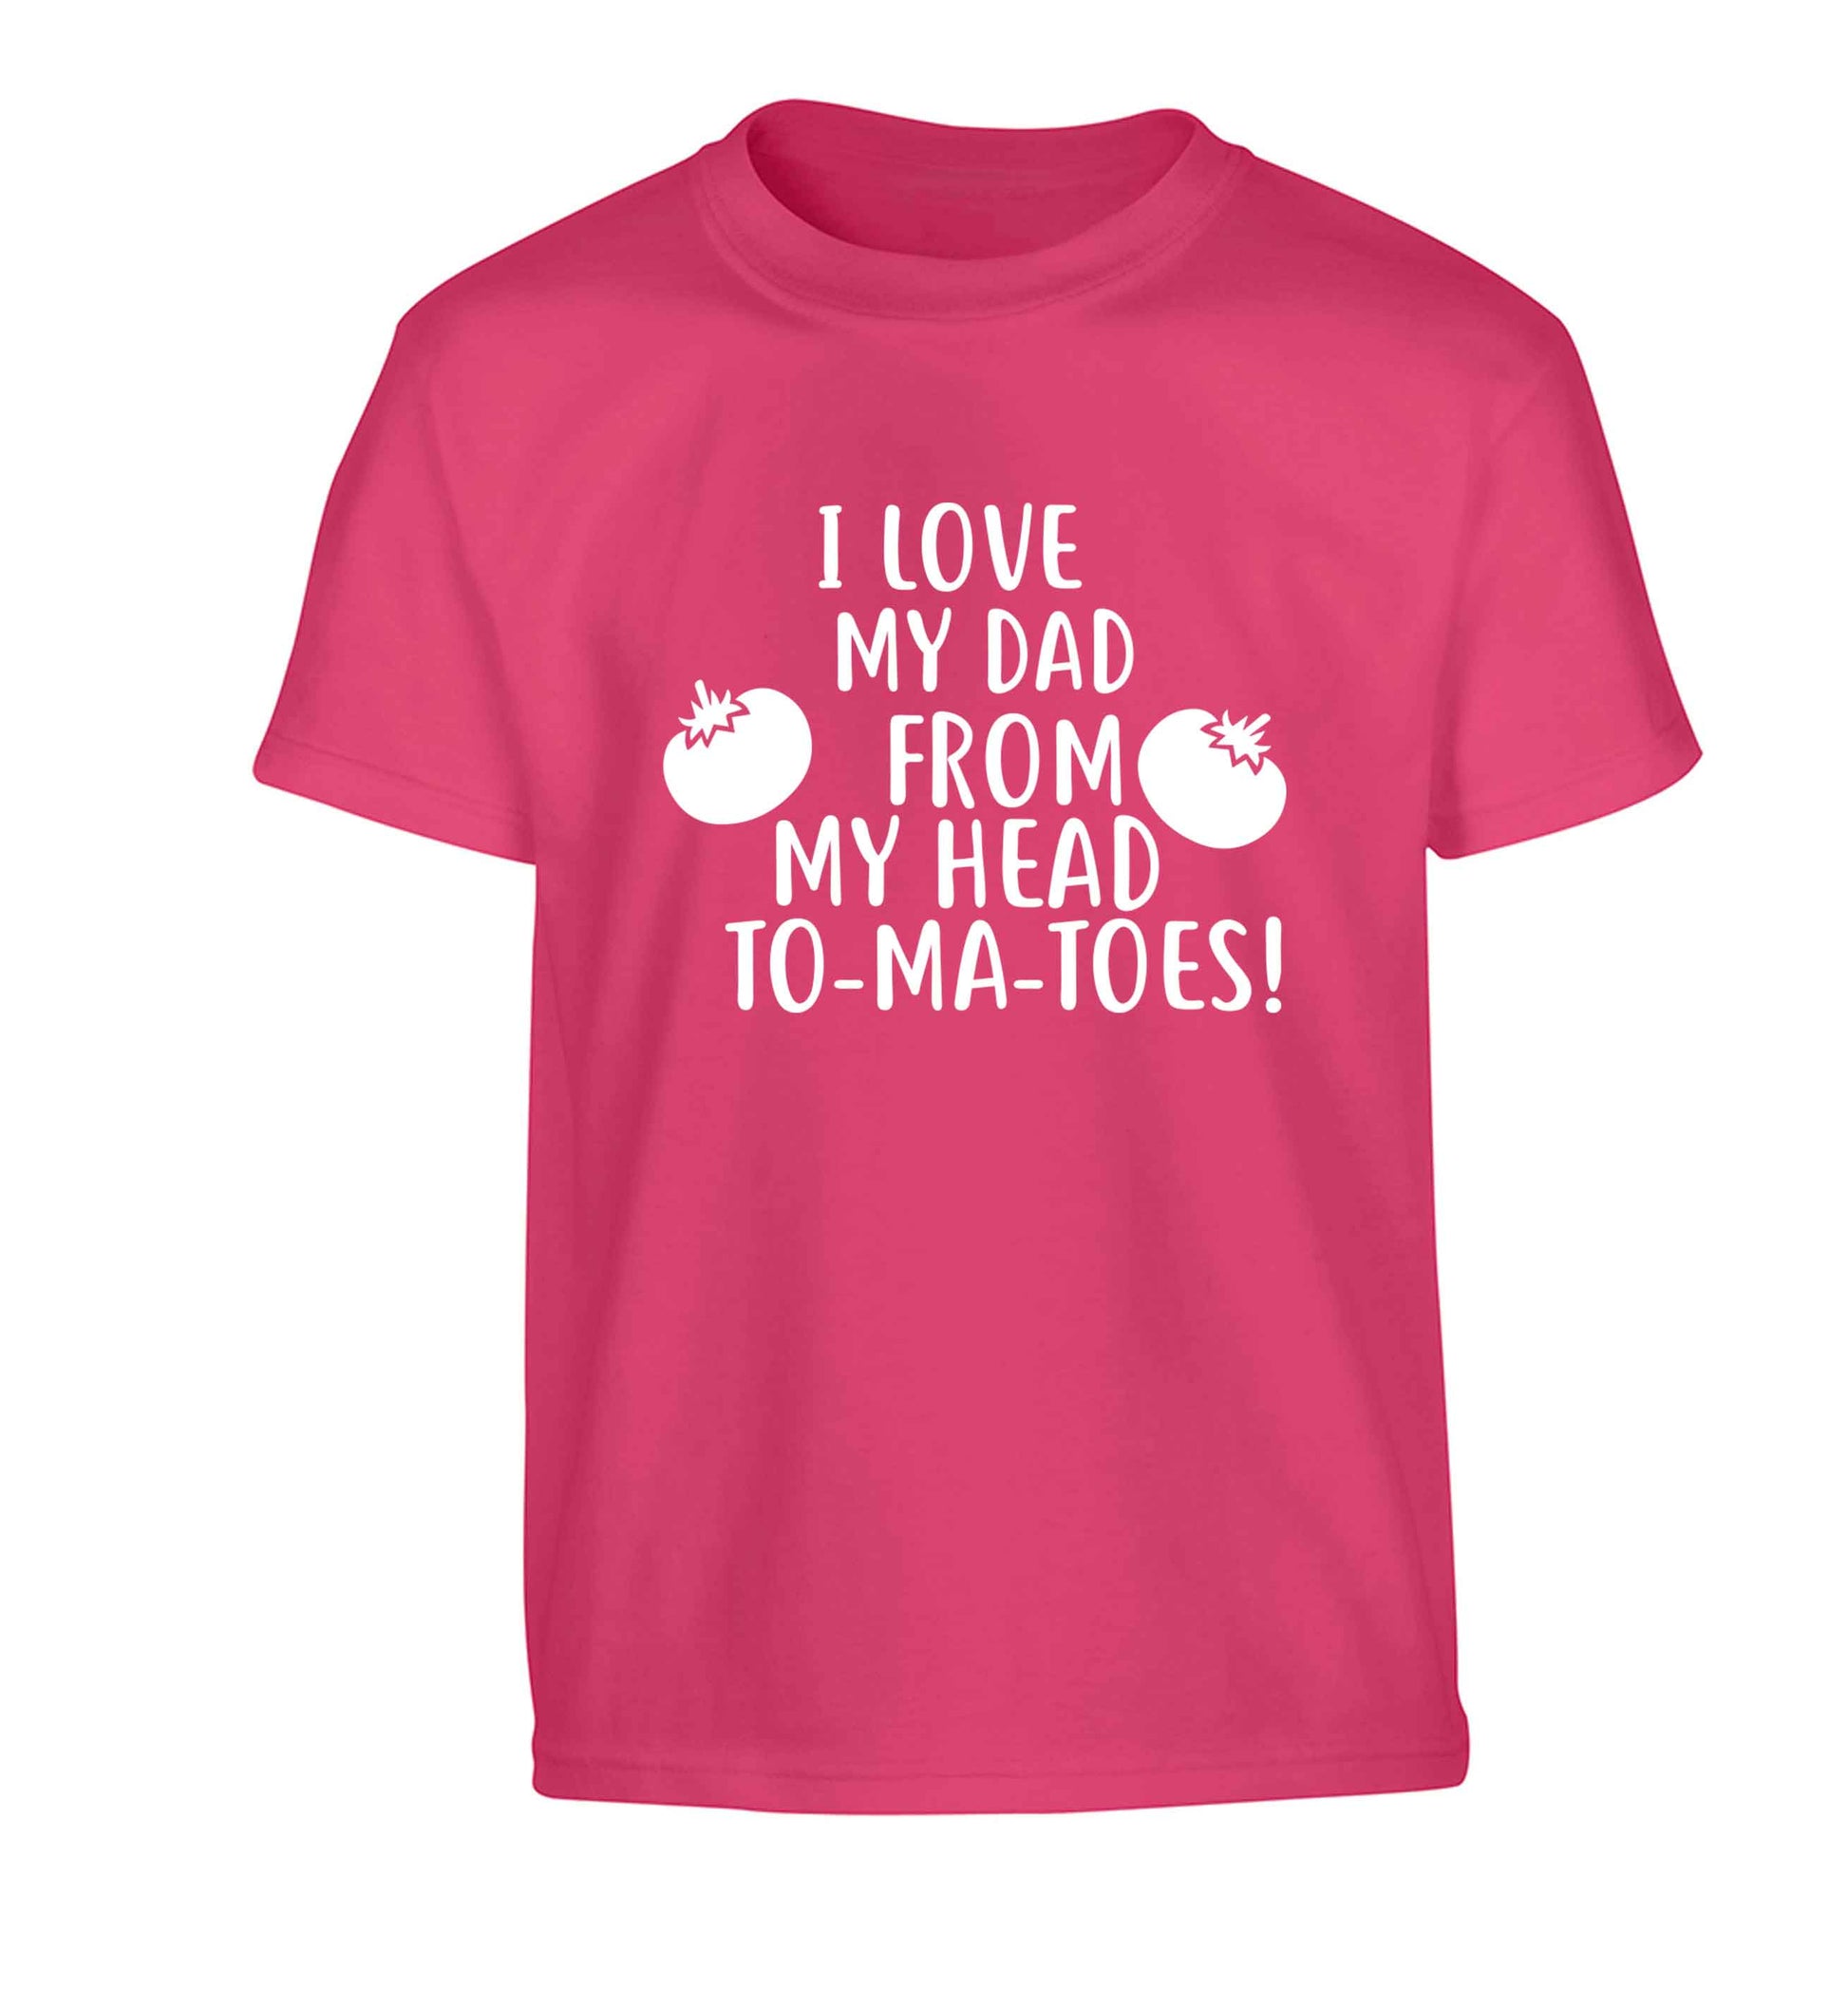 I love my dad from my head to-ma-toes Children's pink Tshirt 12-13 Years